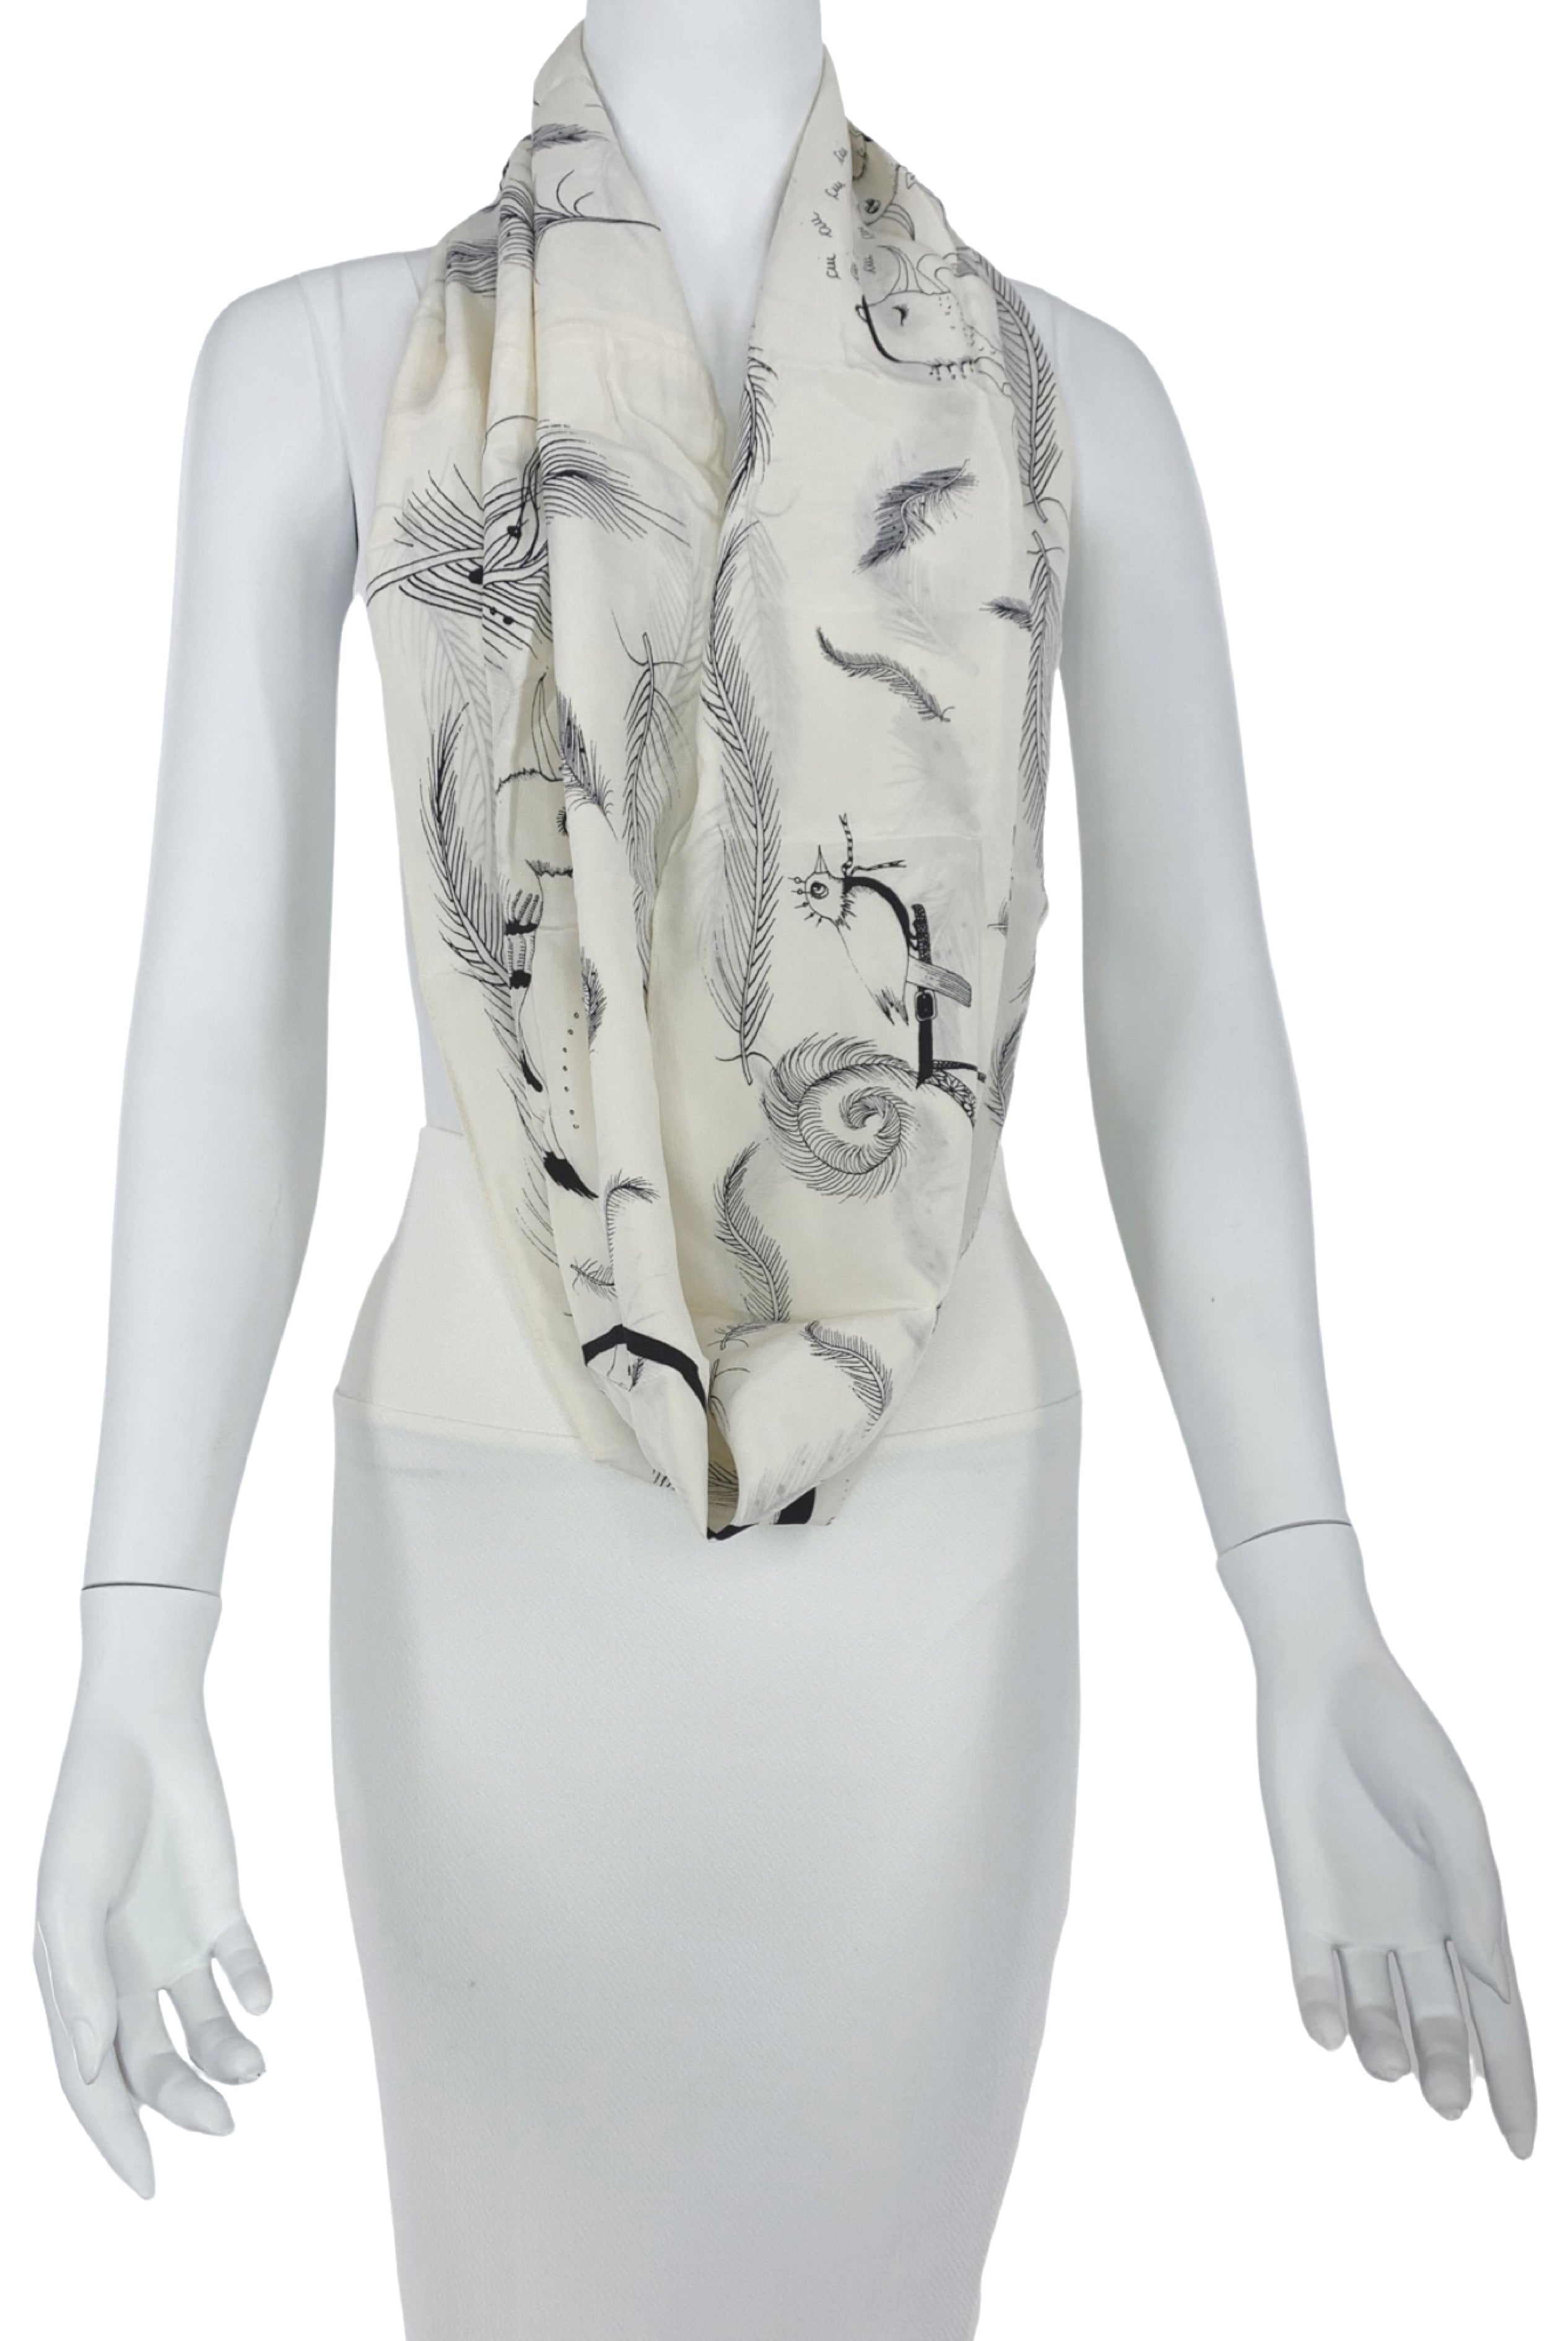 Florence Balducci Silk Infinity Scarf - Front view